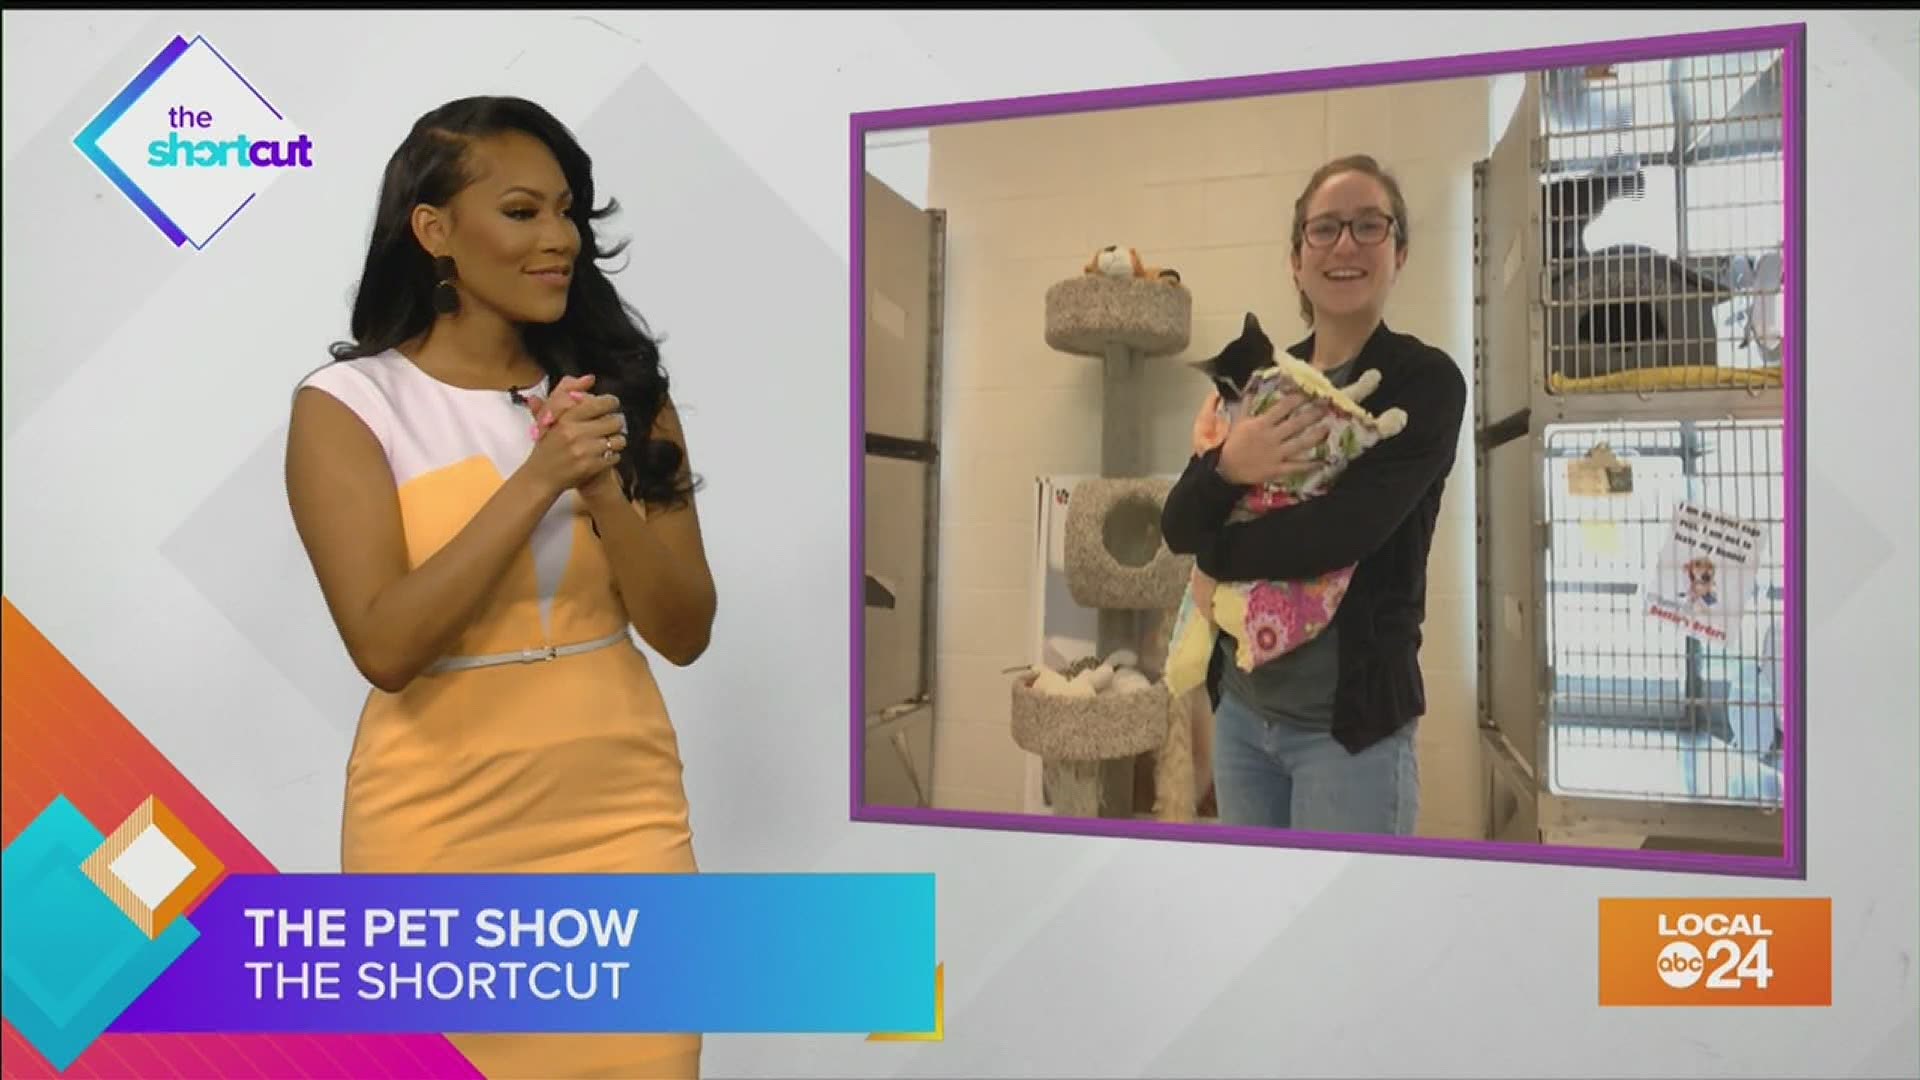 Pick up your nest pet from the Humane Society. Join Sydney Neely on The Shortcut.